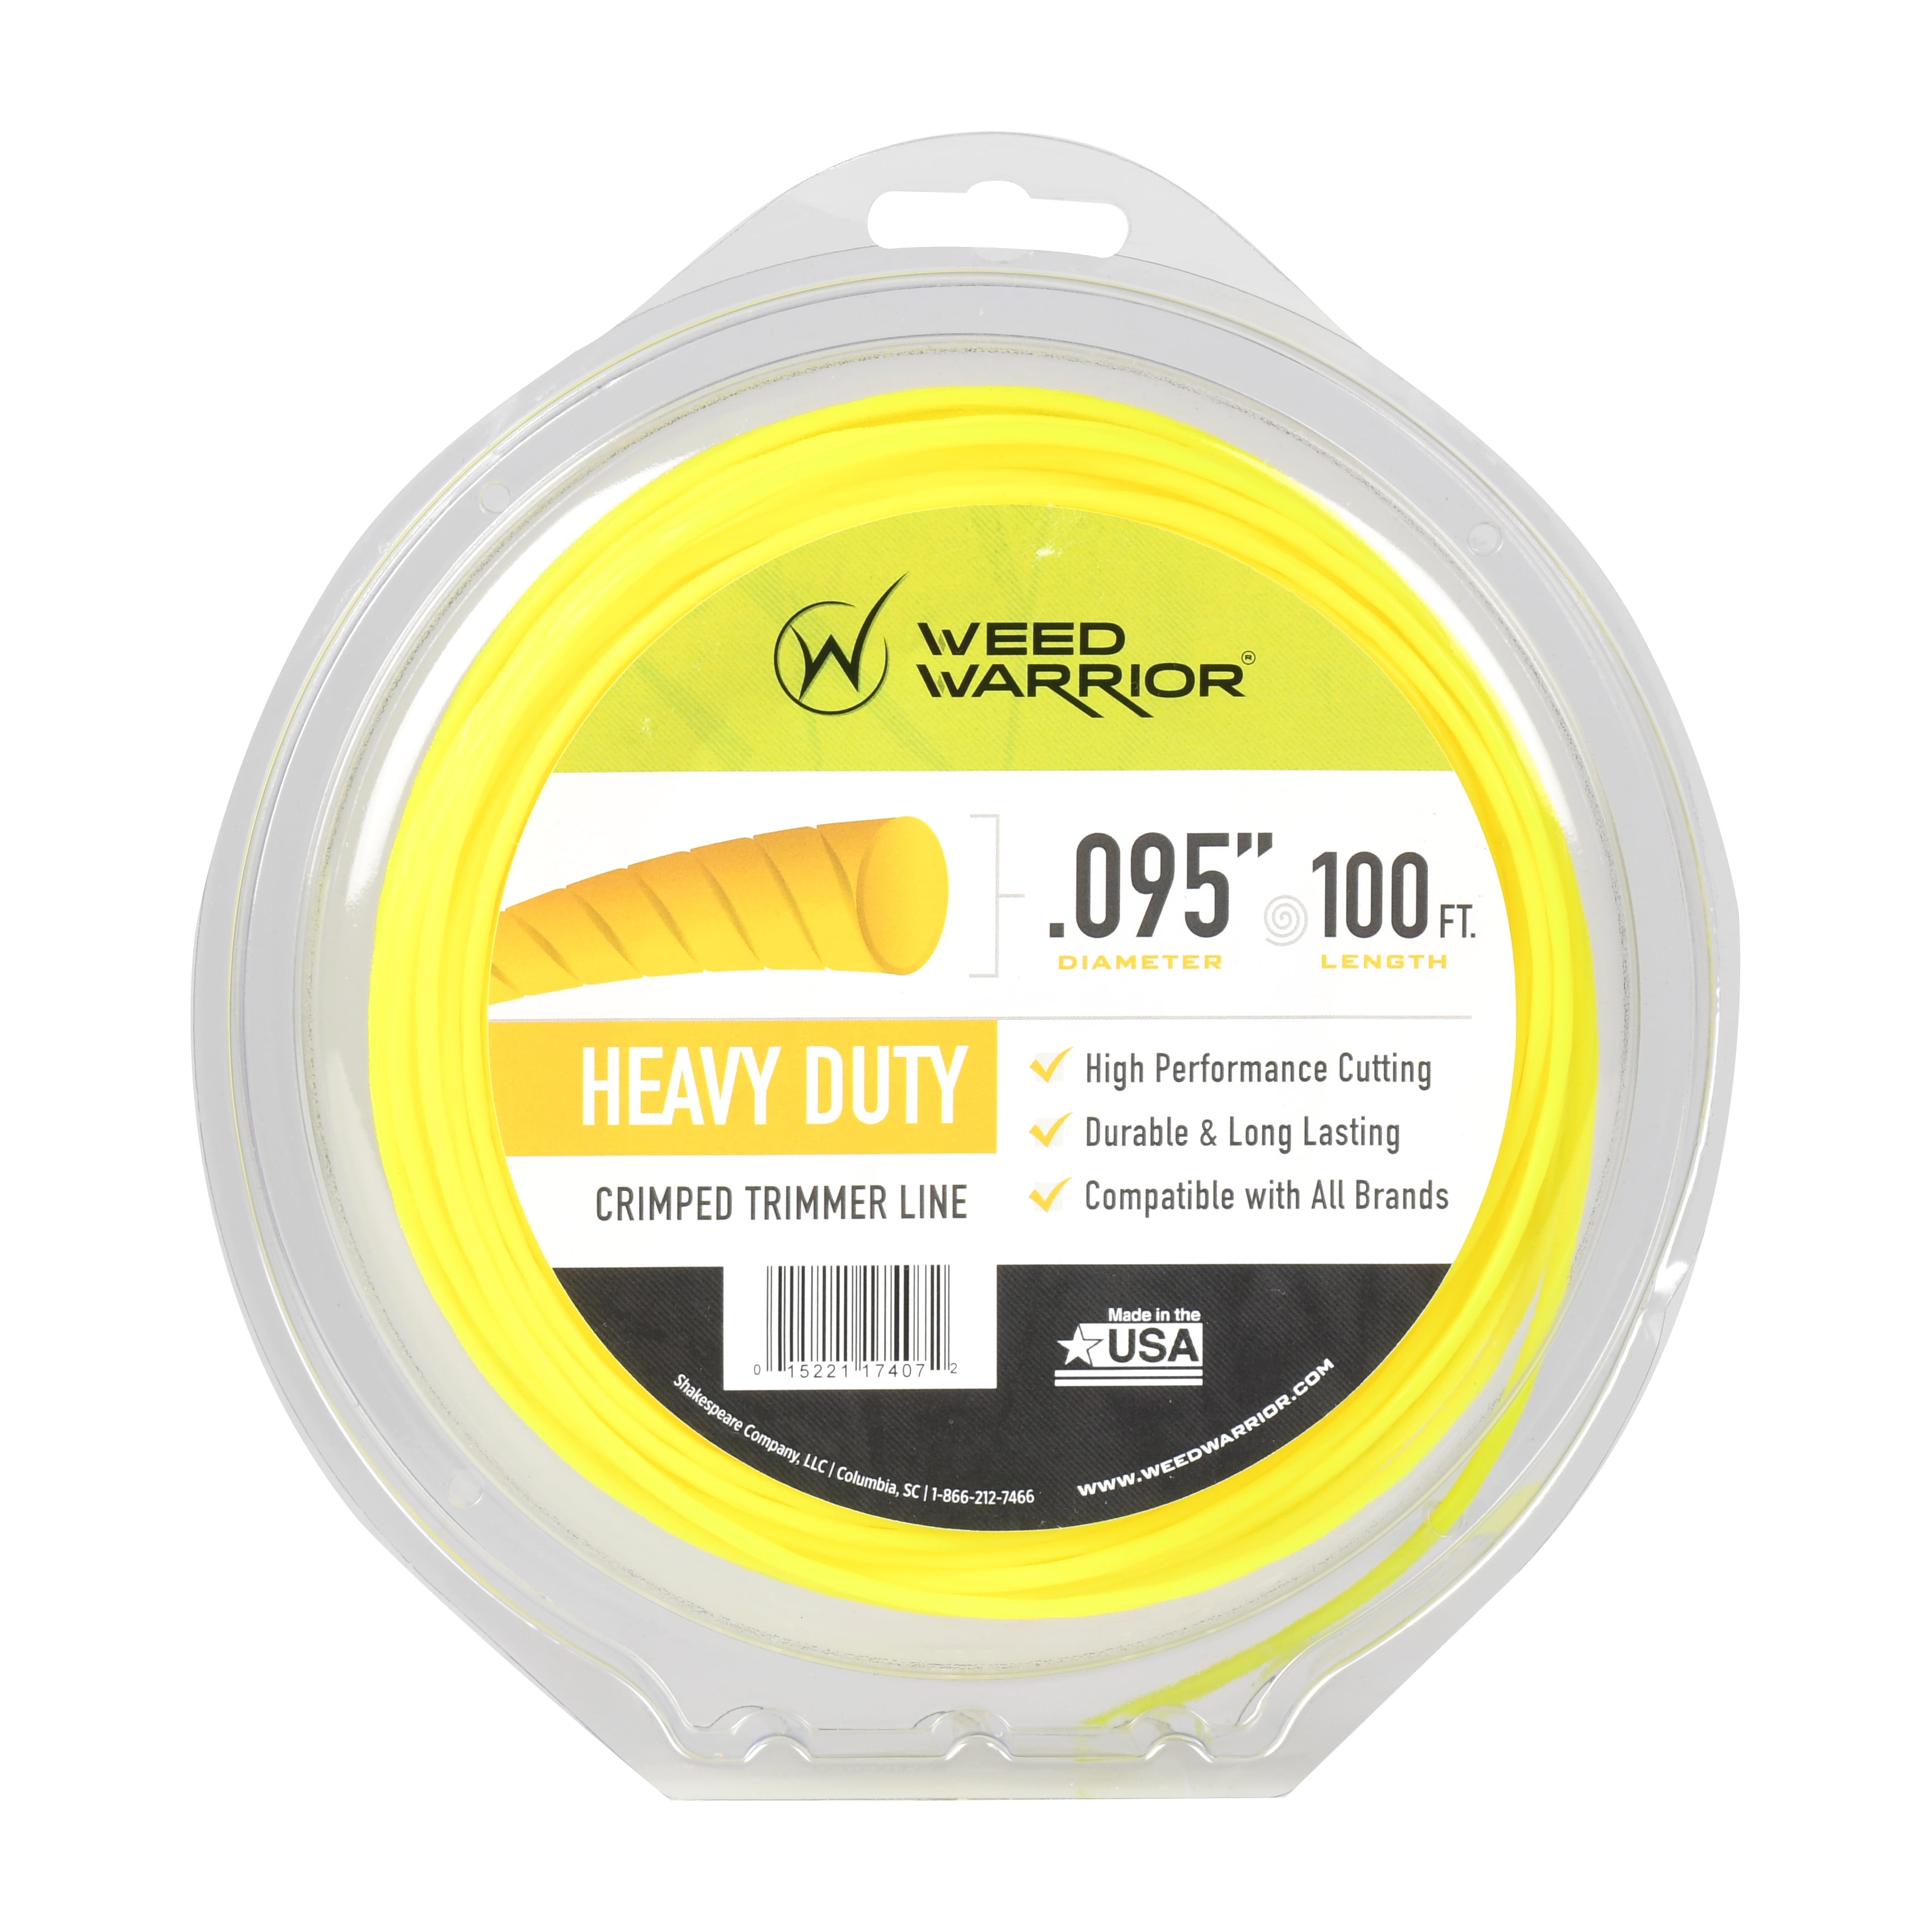 .095" x 100 ft @ Weed Warrior Commercial Twisted Trimmer Line String 